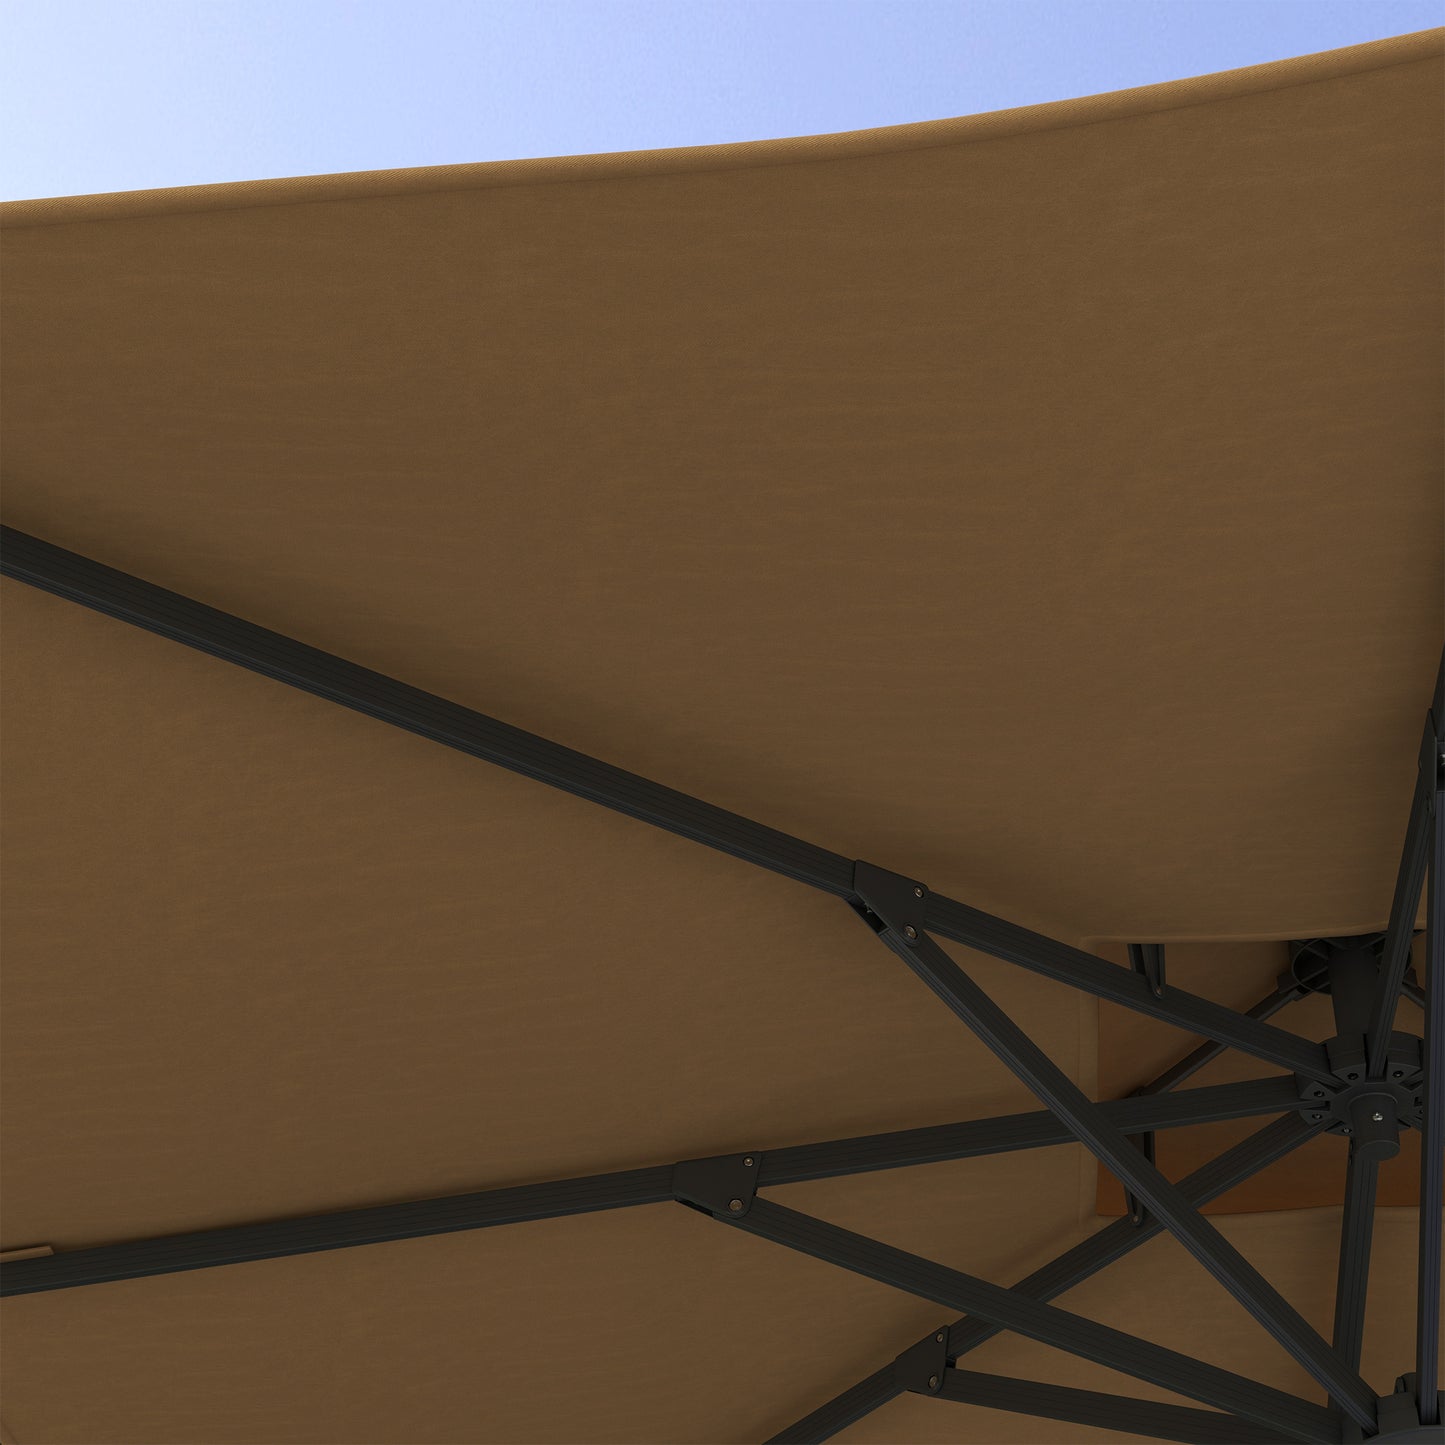 Outsunny Garden Parasol, 3(m) Cantilever Parasol with Hydraulic Mechanism, Dual Vented Top, 8 Ribs, Cross Base, Khaki